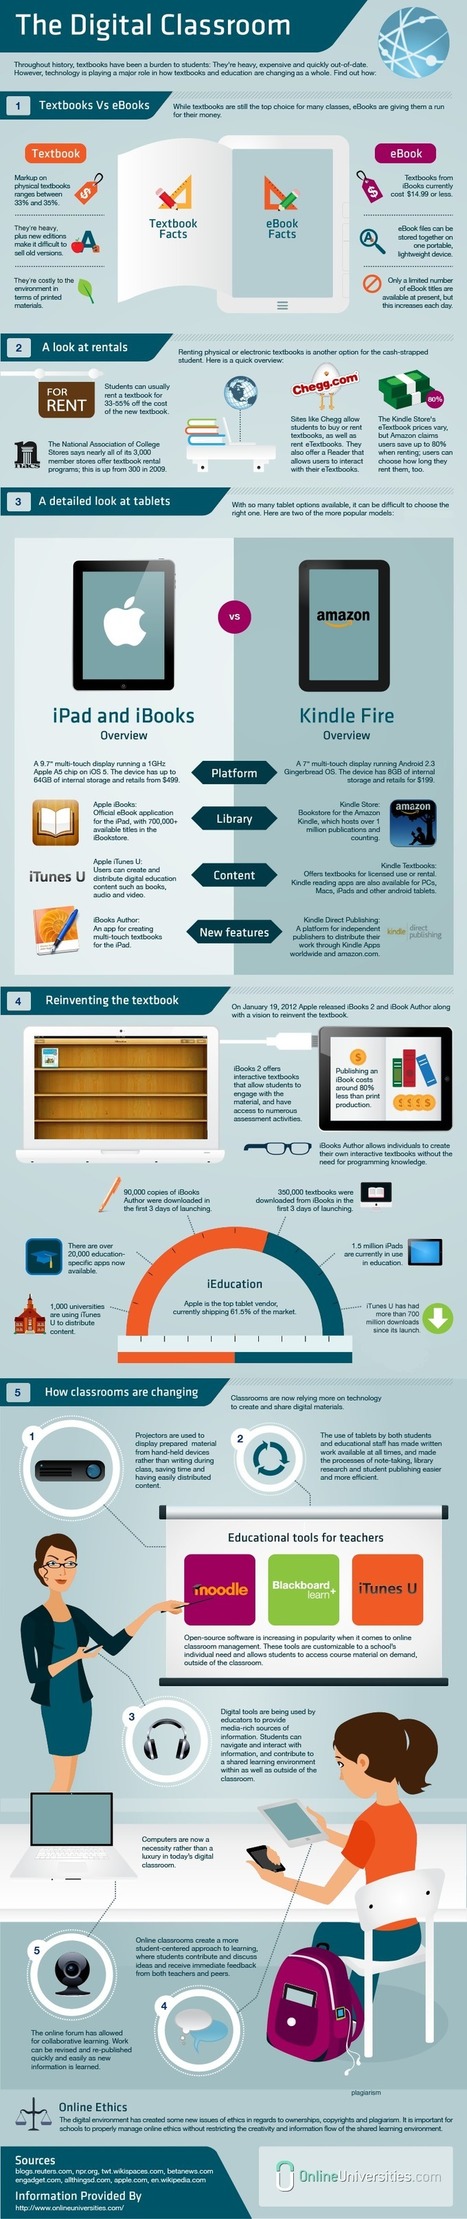 The Elements Of A Digital Classroom [Infographic] | Create, Innovate & Evaluate in Higher Education | Scoop.it